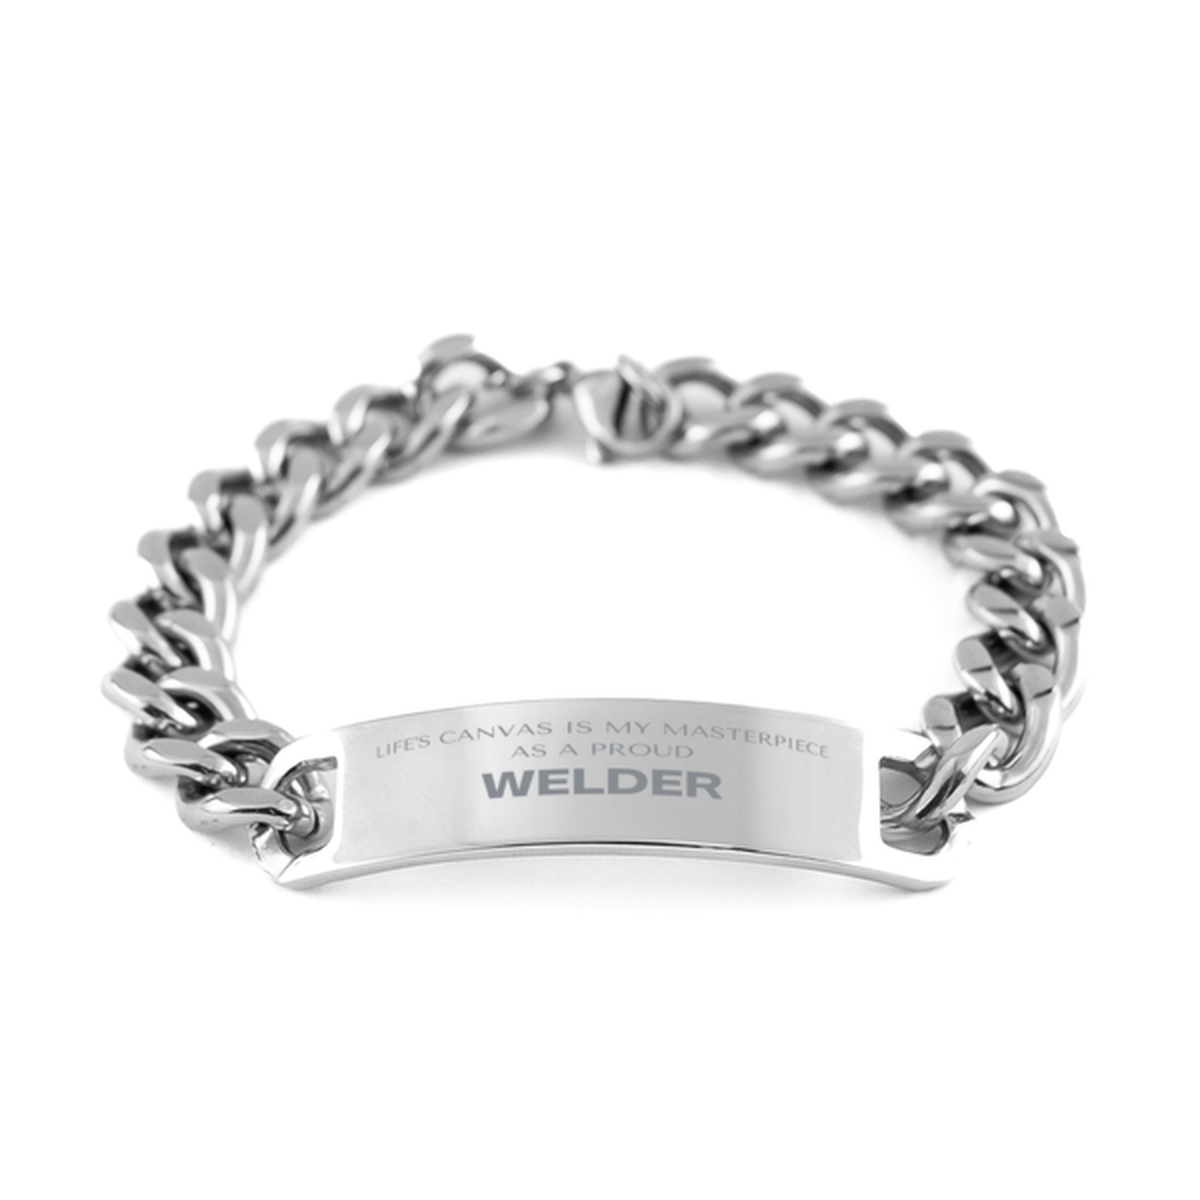 Proud Welder Gifts, Life's canvas is my masterpiece, Epic Birthday Christmas Unique Cuban Chain Stainless Steel Bracelet For Welder, Coworkers, Men, Women, Friends